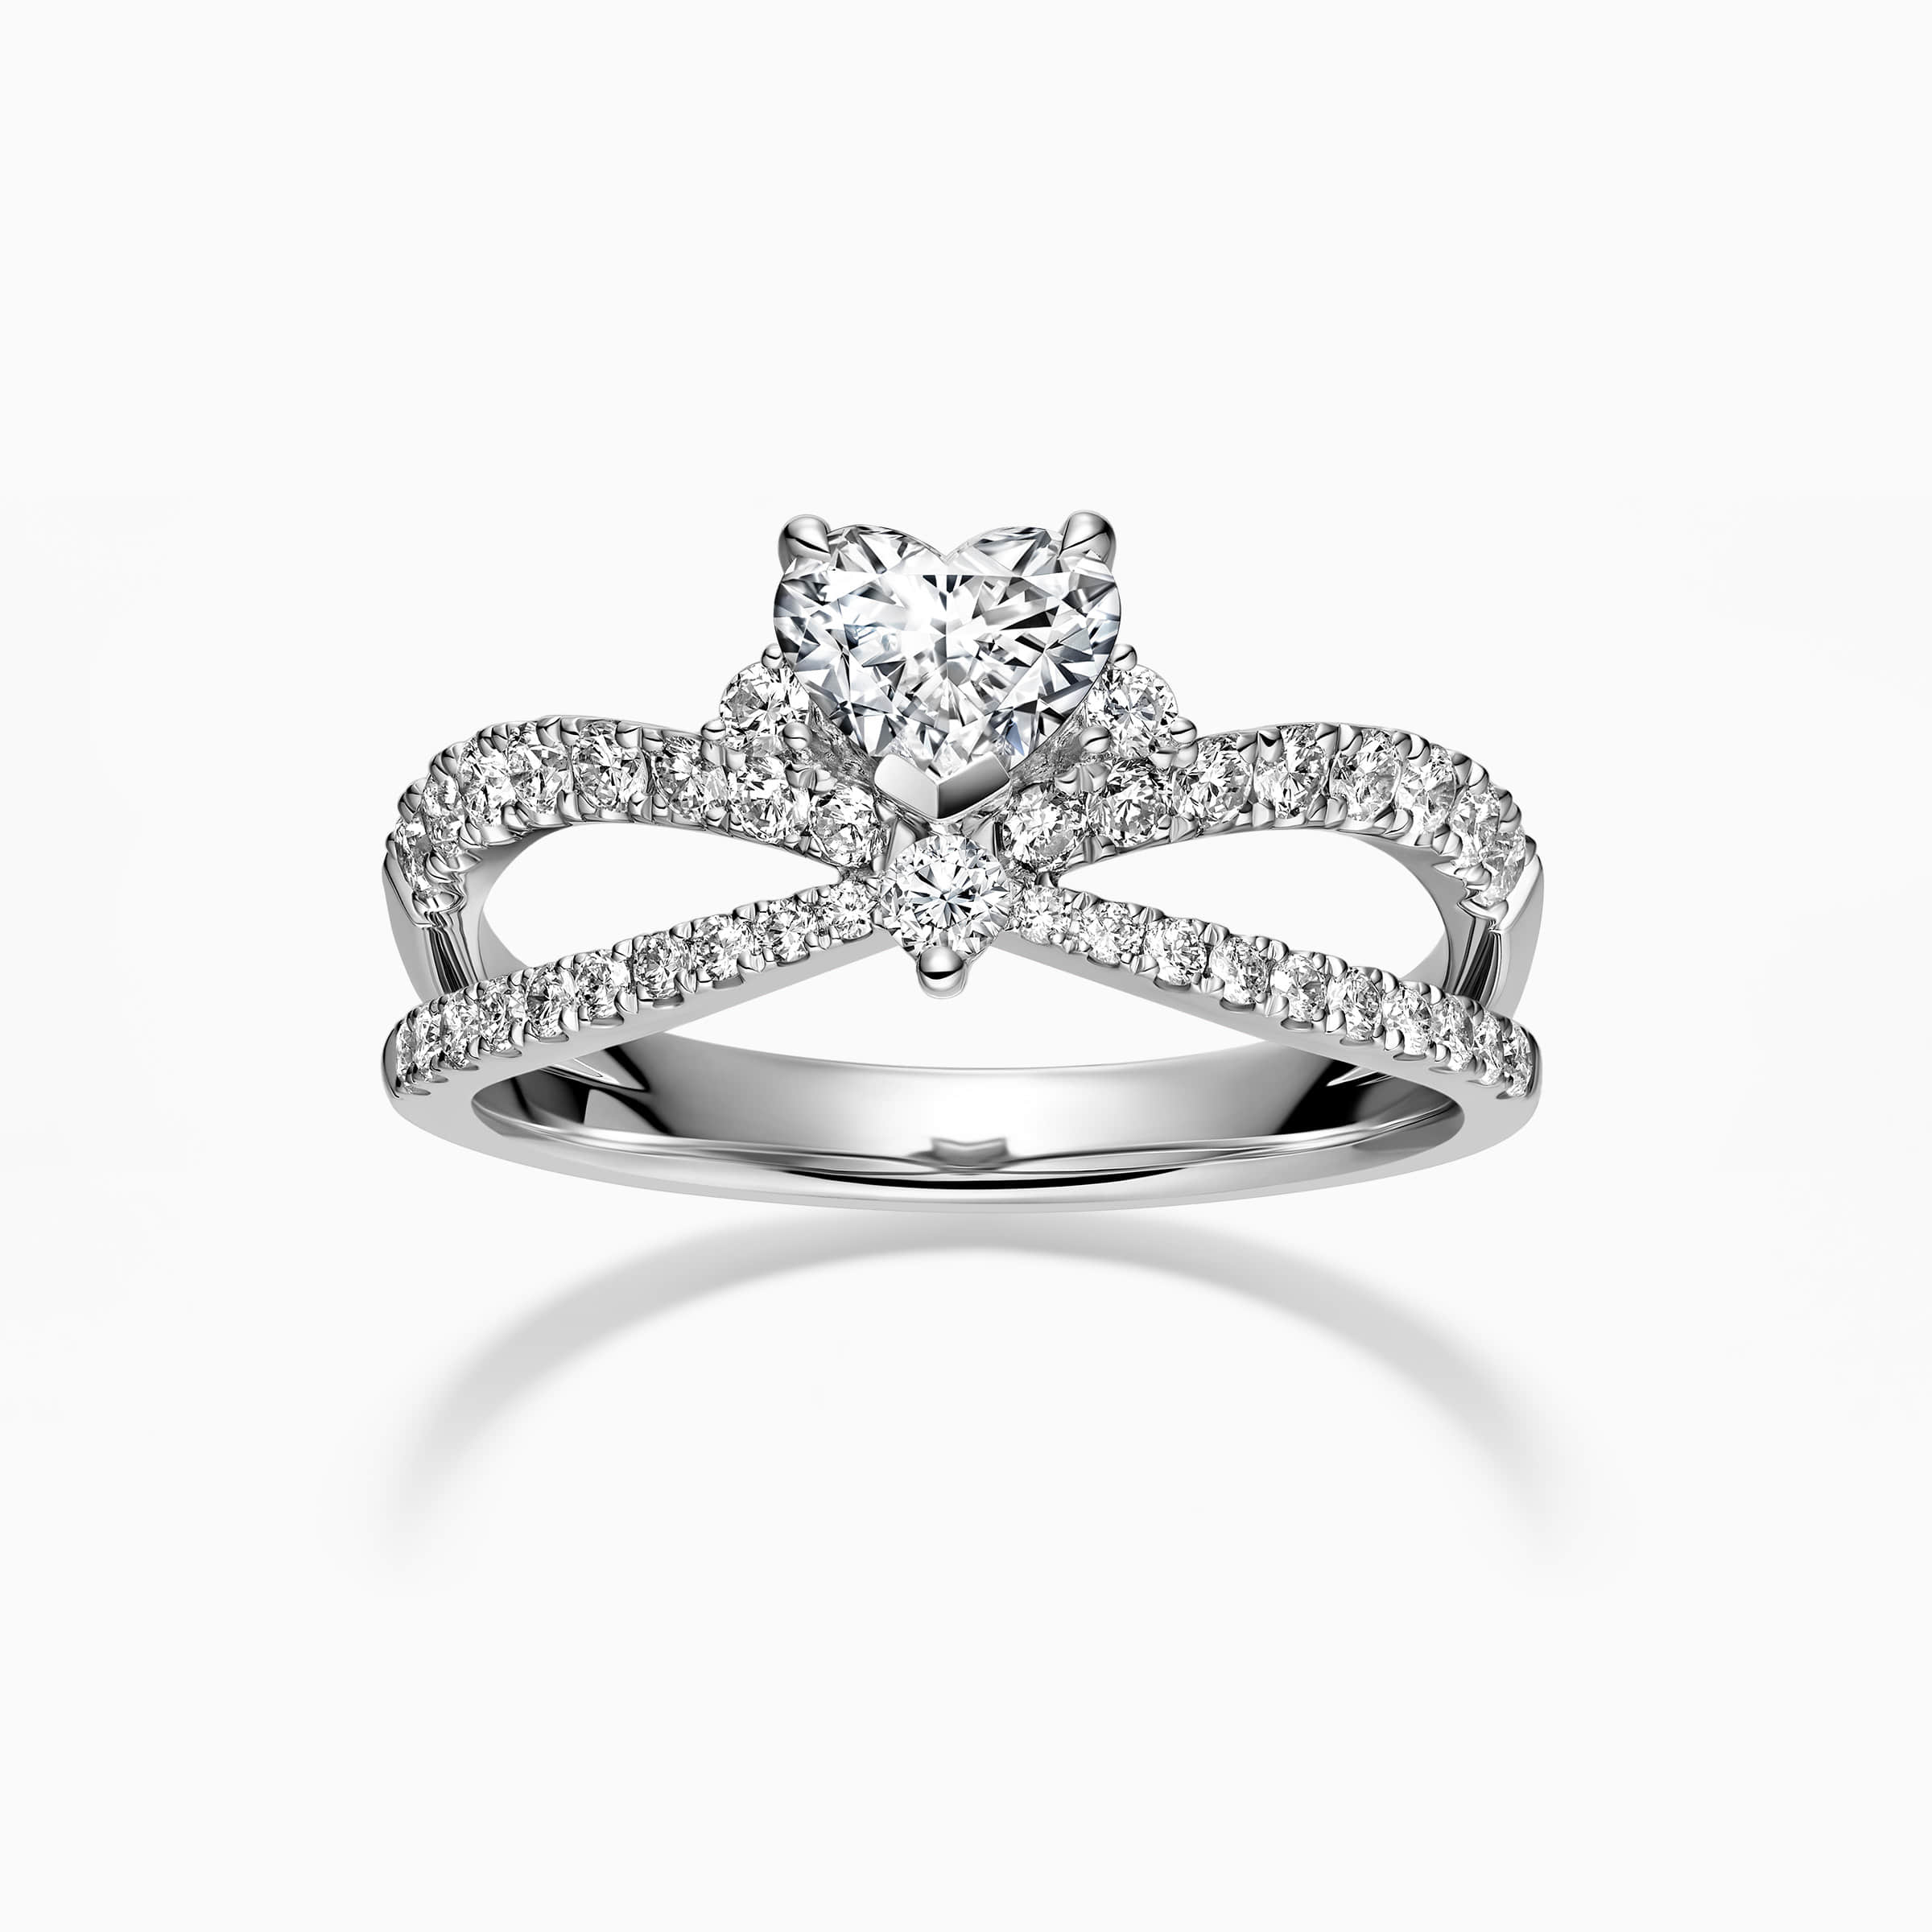 darry ring heart diamond engagement ring angle view